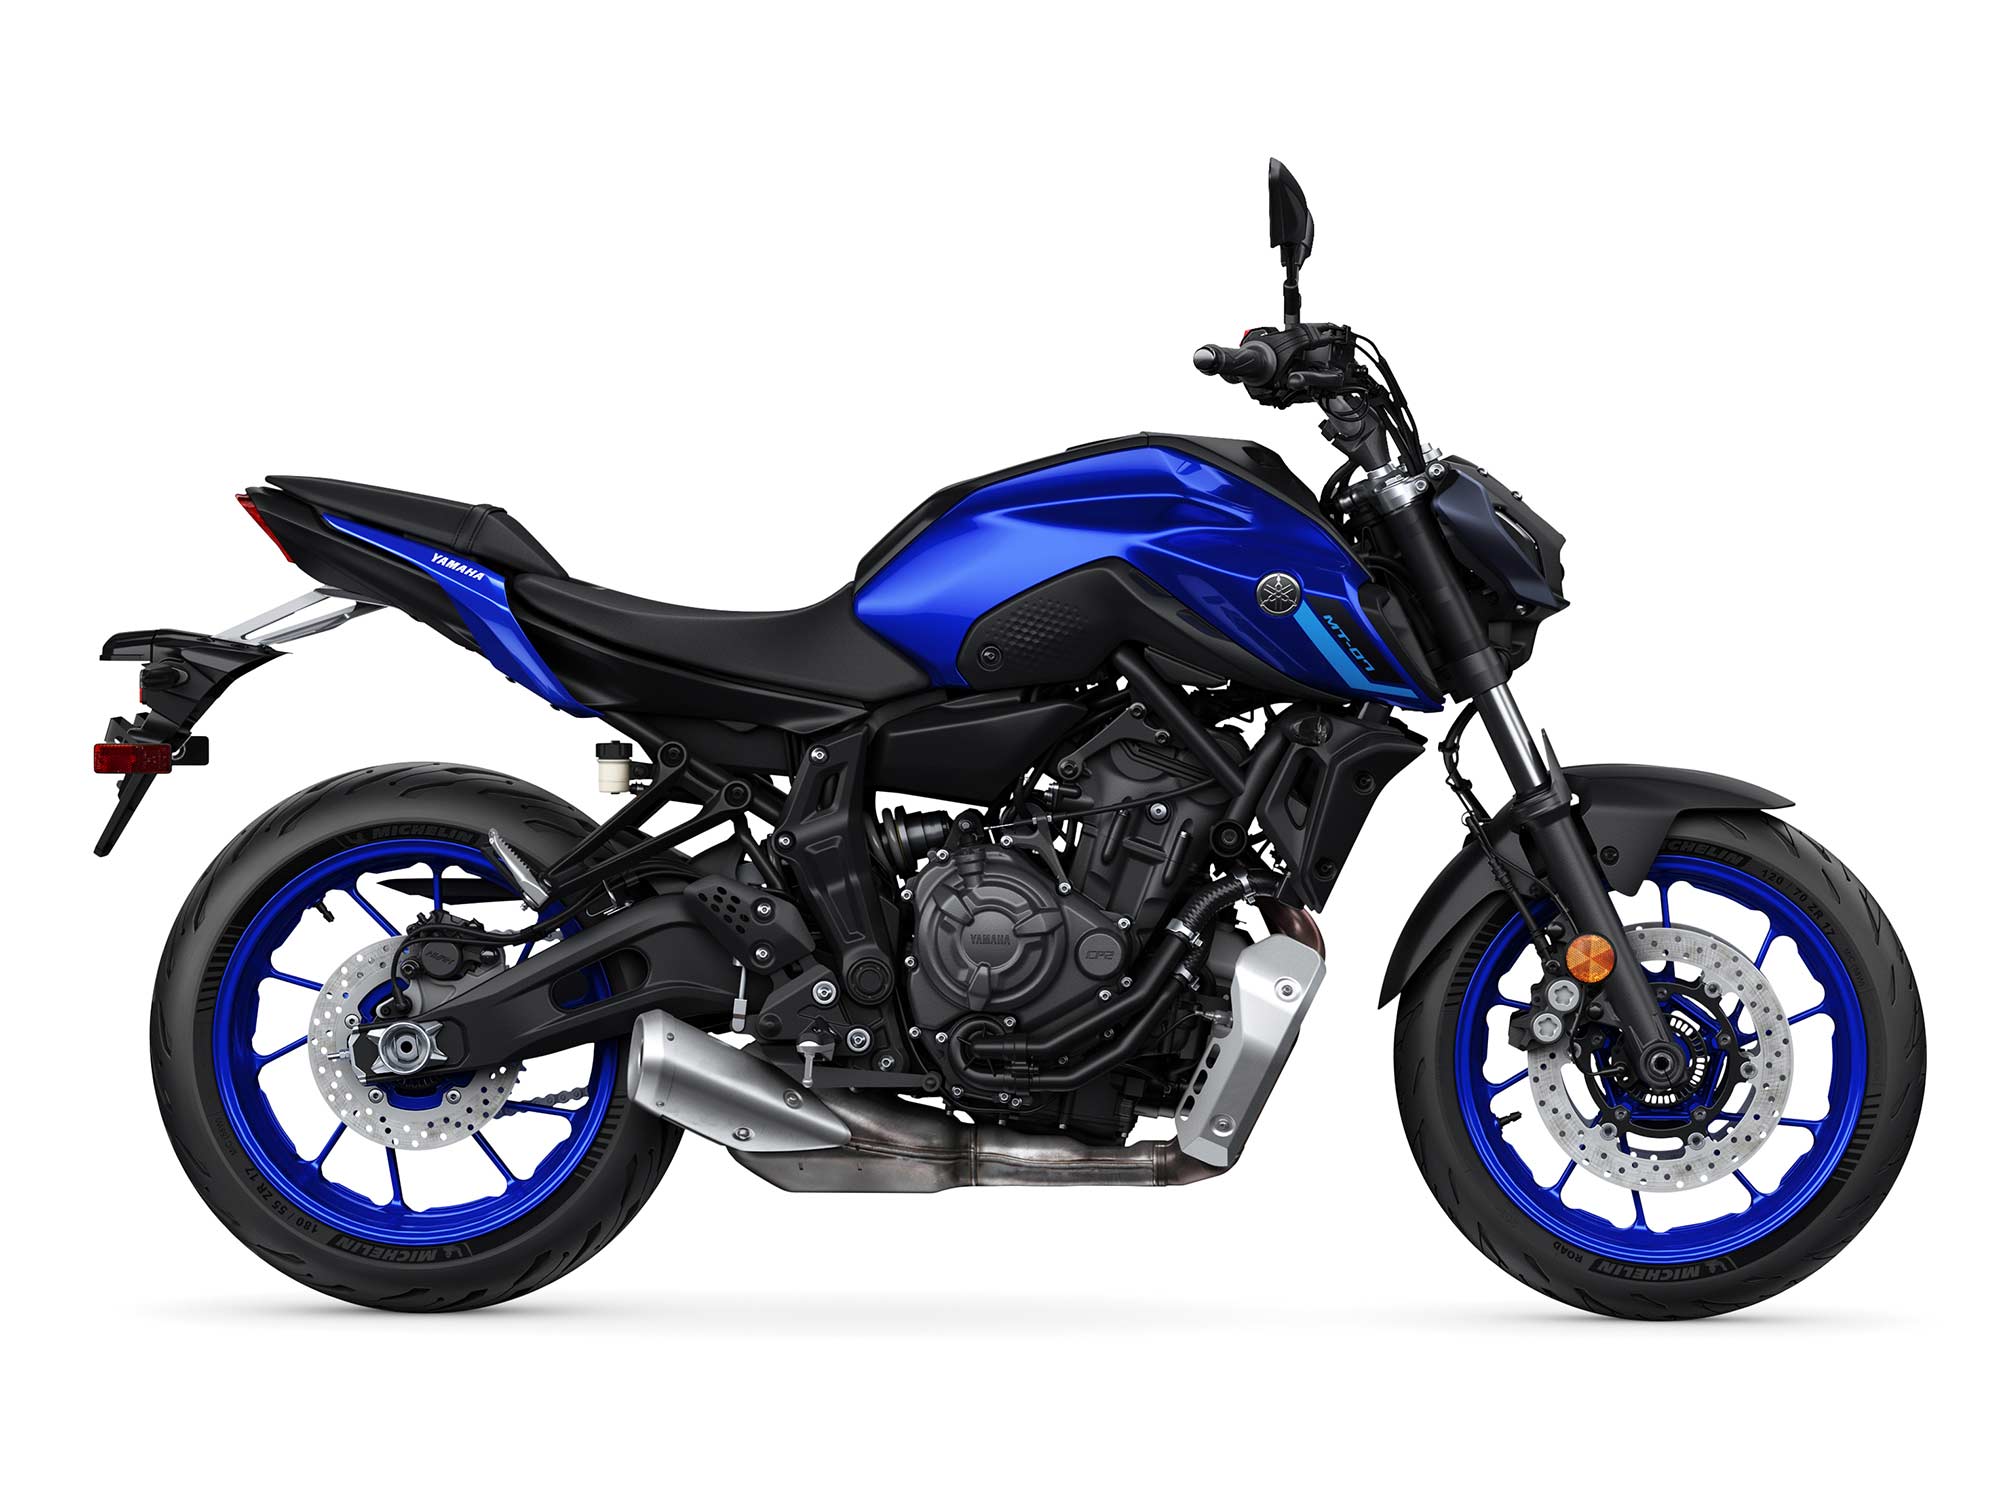 Yamaha's MT-07 and MT-125 get minor updates for 2023